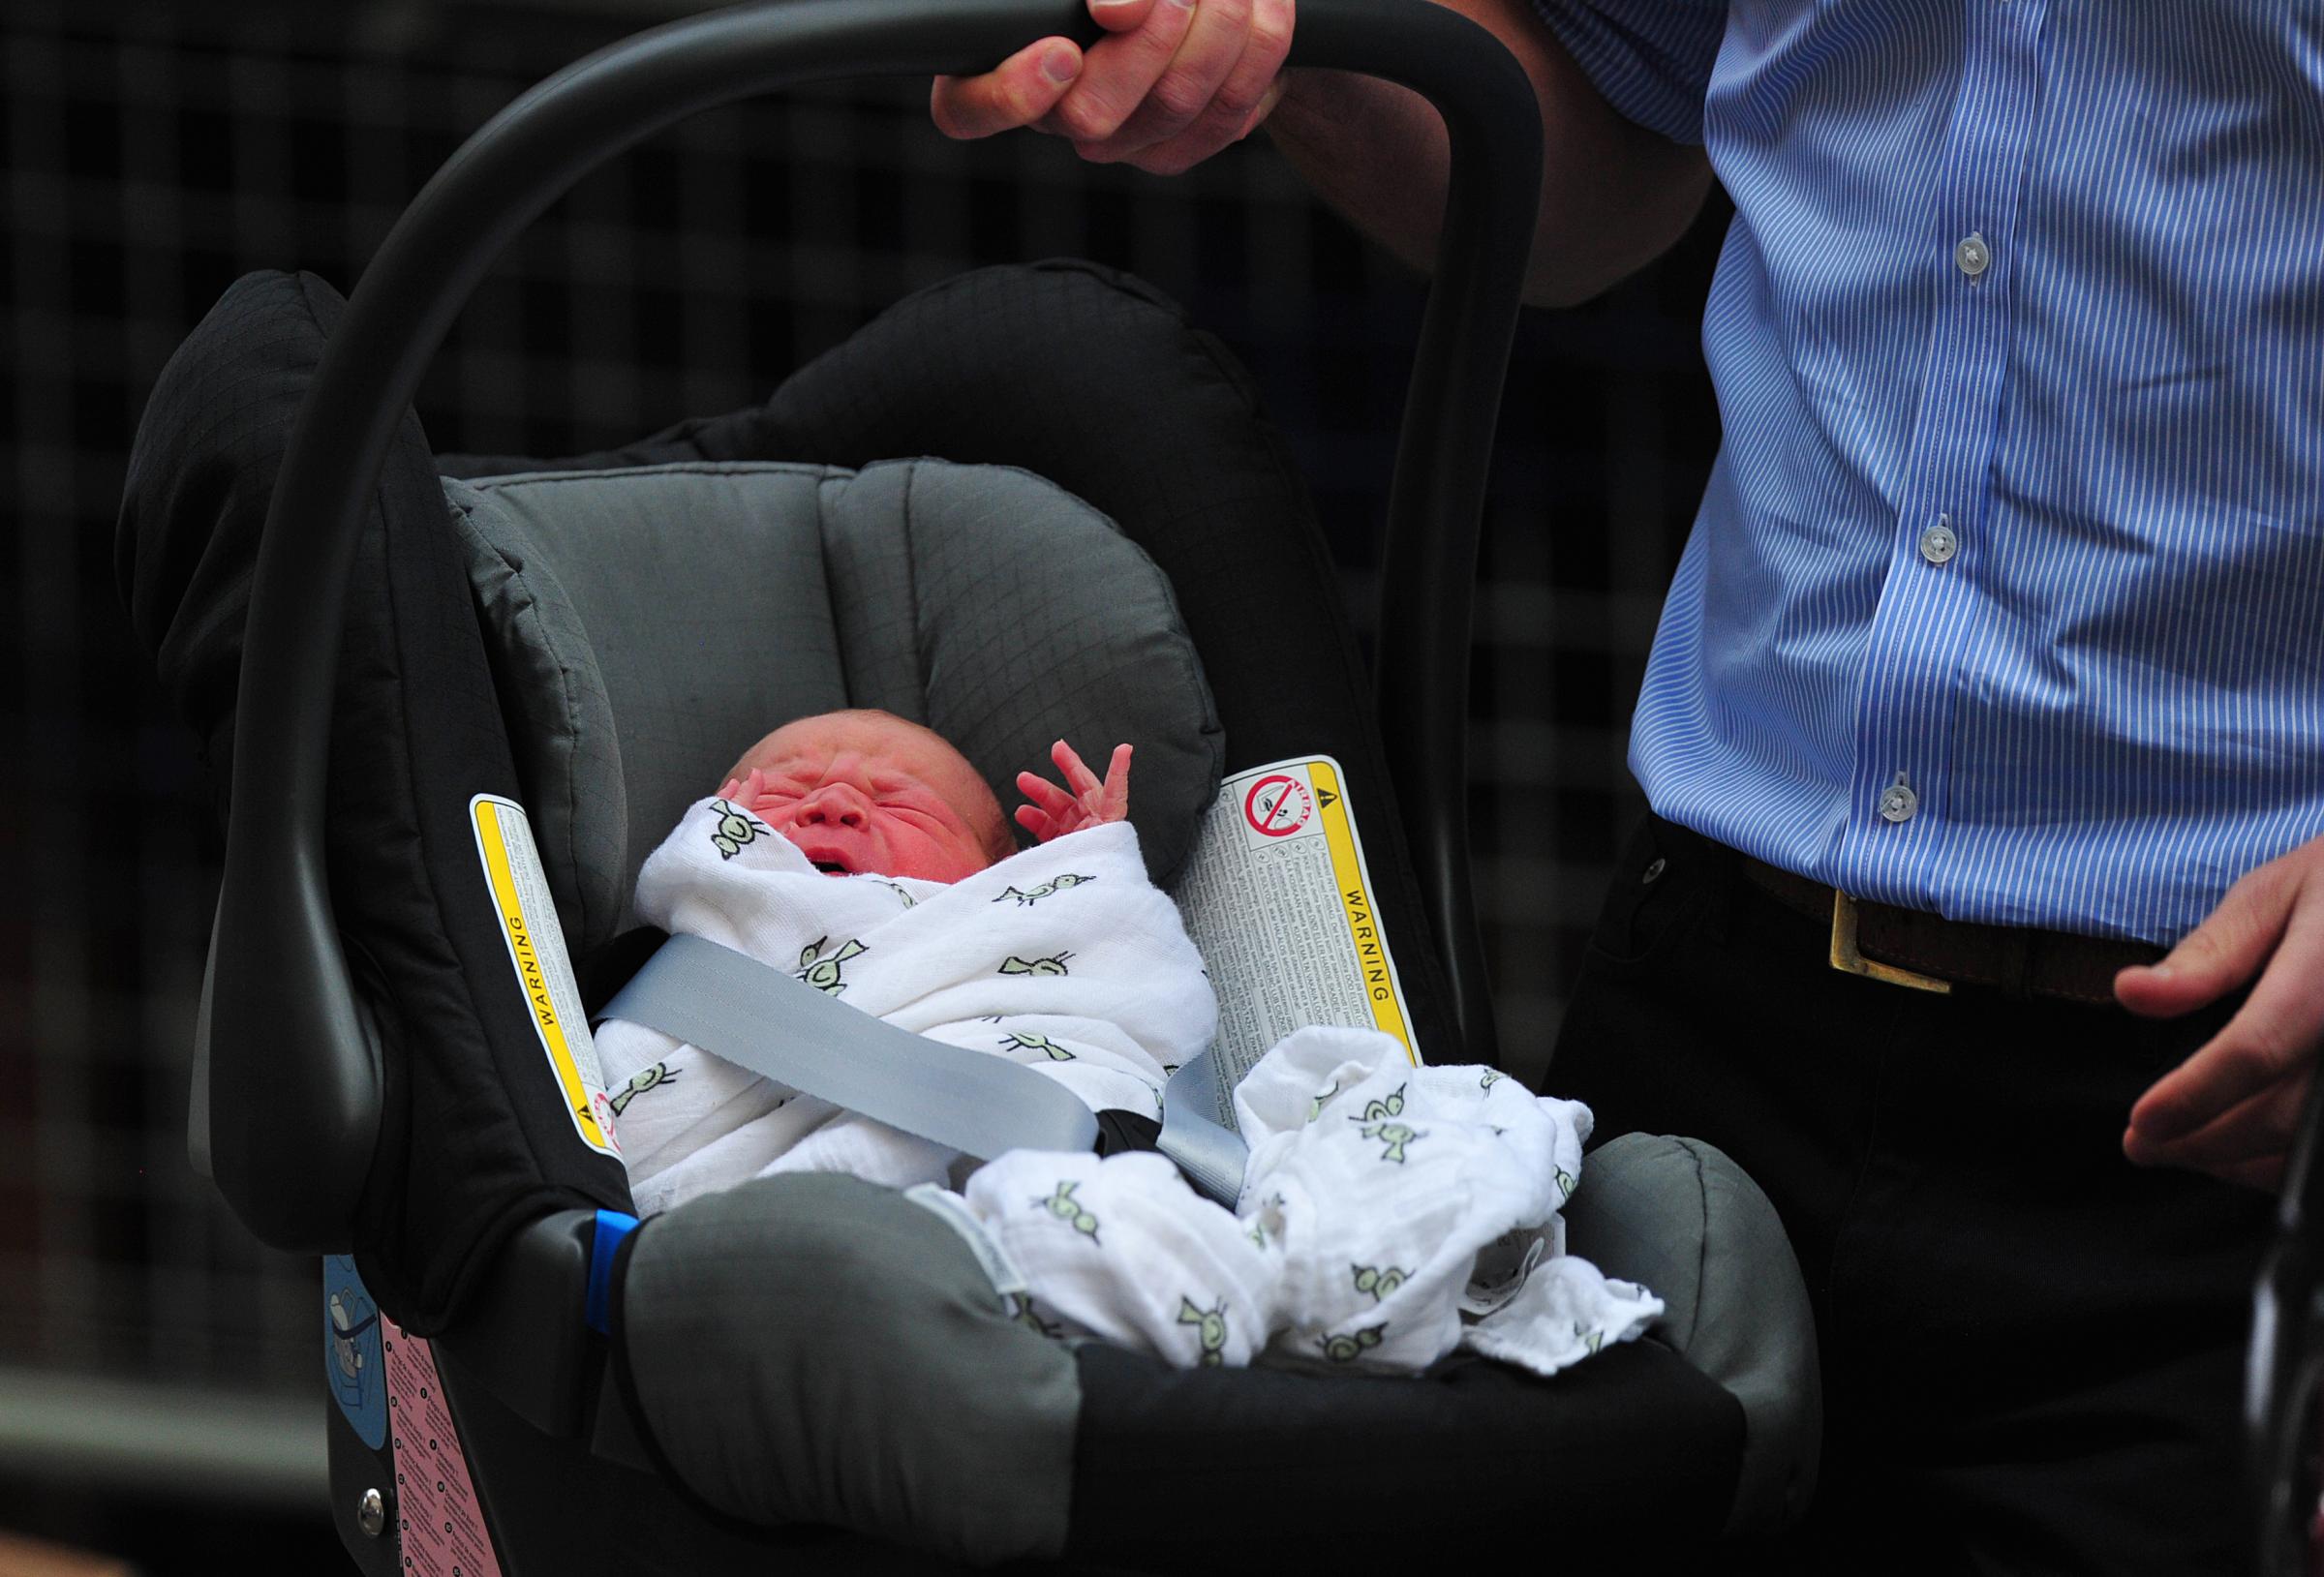 Prince William and Catherine, Duchess of Cambridge's new-born baby boy is introduced to the world's media outside the Lindo Wing of St Mary's Hospital in London on July 23, 2013. The baby was born on Monday afternoon weighing eight pounds six ounces (3.8 kilogrammes). The baby, titled His Royal Highness, Prince (name) of Cambridge, is directly in line to inherit the throne after Charles, Queen Elizabeth II's eldest son and heir, and his eldest son William. AFP PHOTO / CARL COURT (Photo credit should read CARL COURT/AFP/Getty Images)